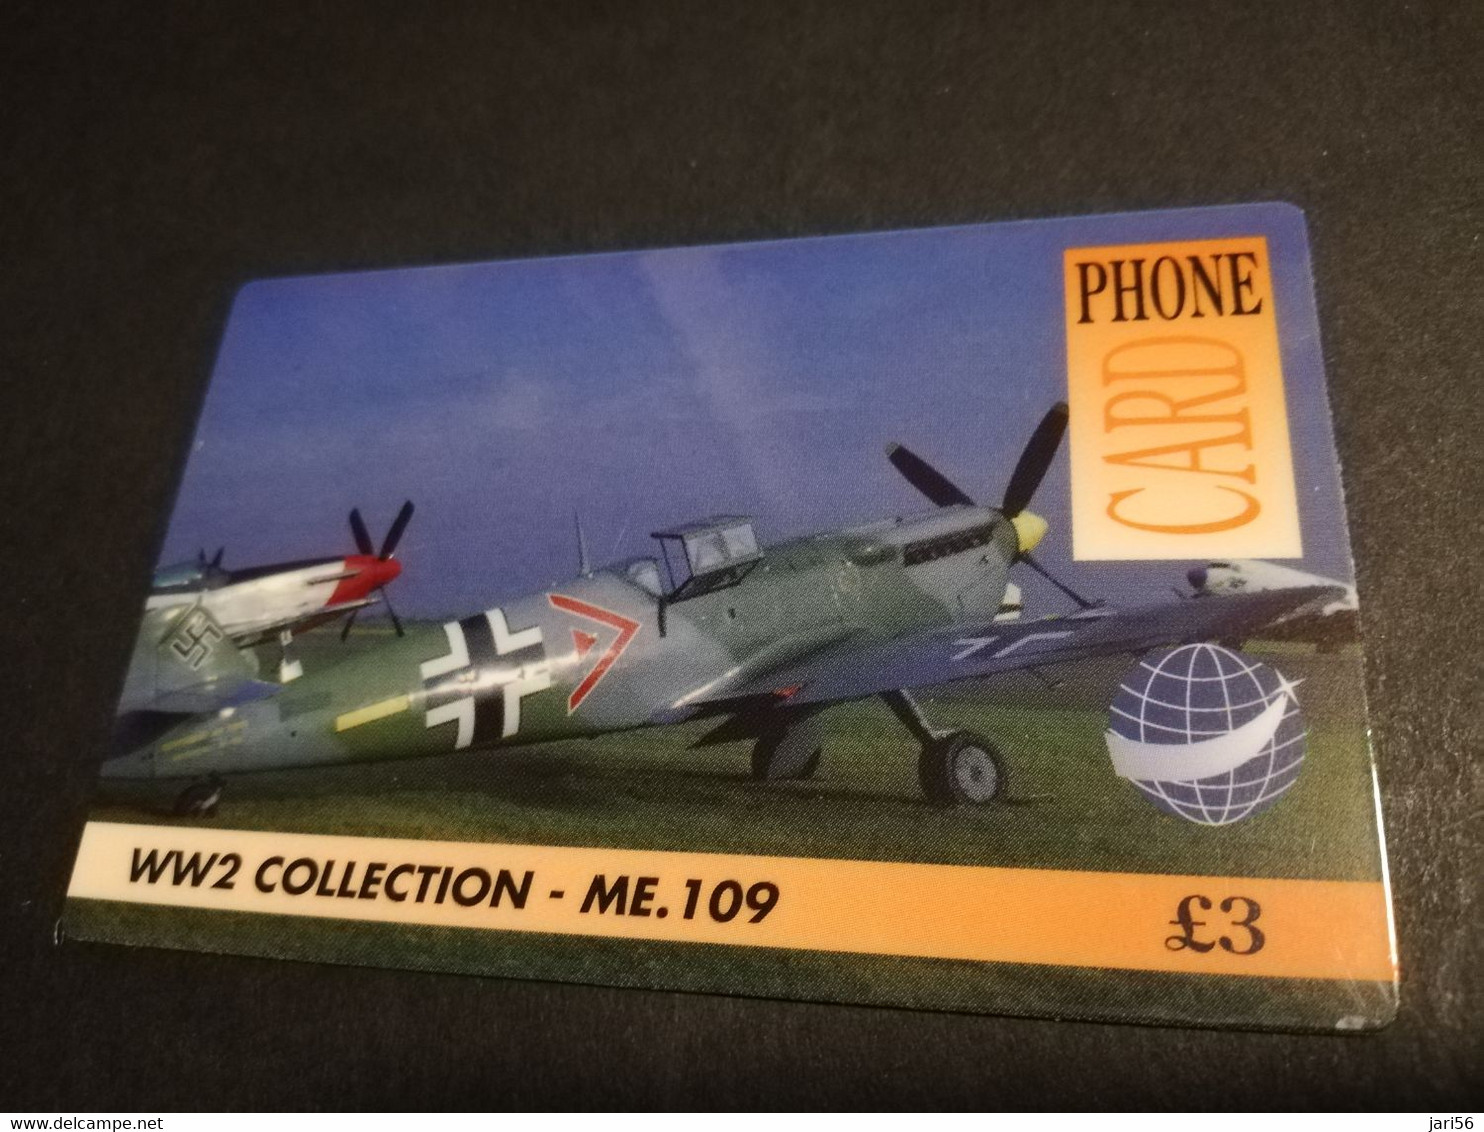 GREAT BRITAIN   3 POUND  AIR PLANES  ME-109   DIT PHONECARD    PREPAID CARD      **5916** - Collections